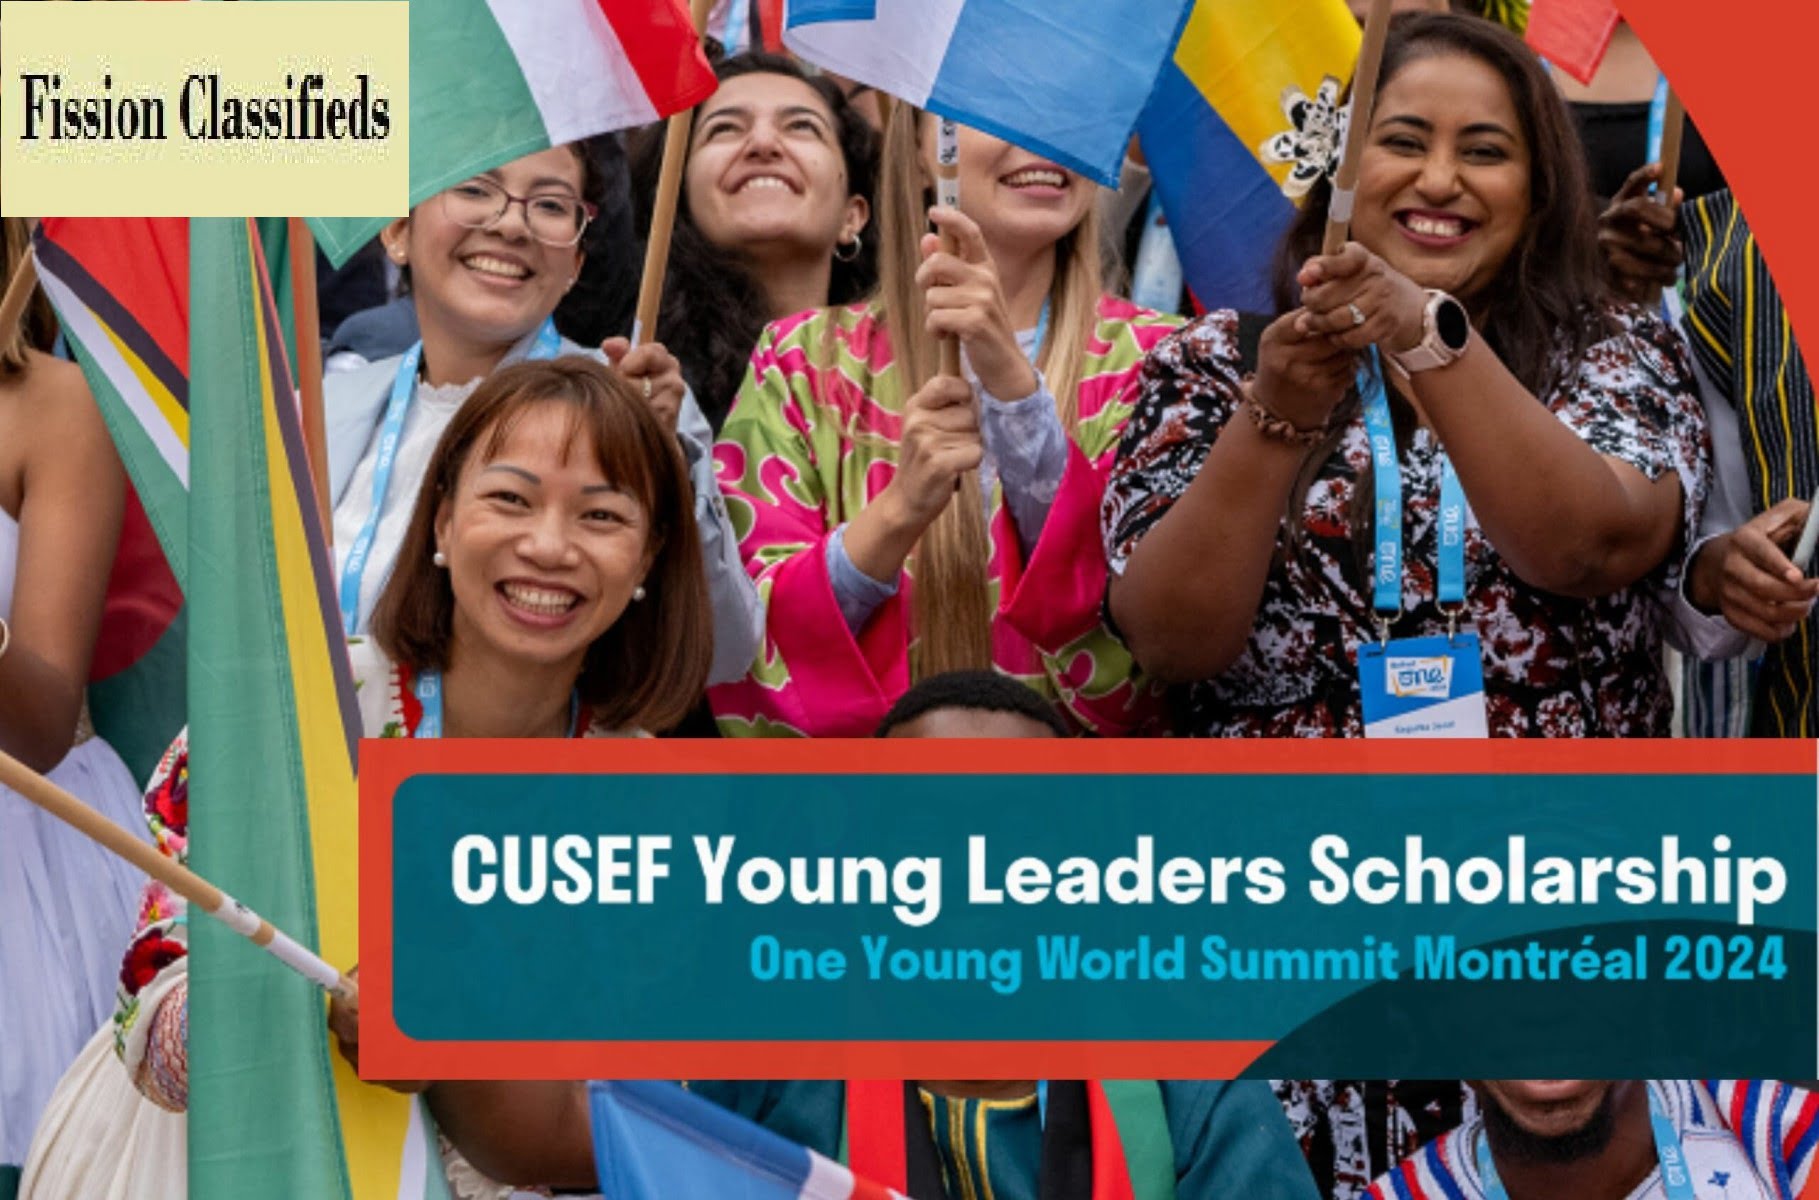 CUSEF Young Leaders Scholarship 2024 at One Young World